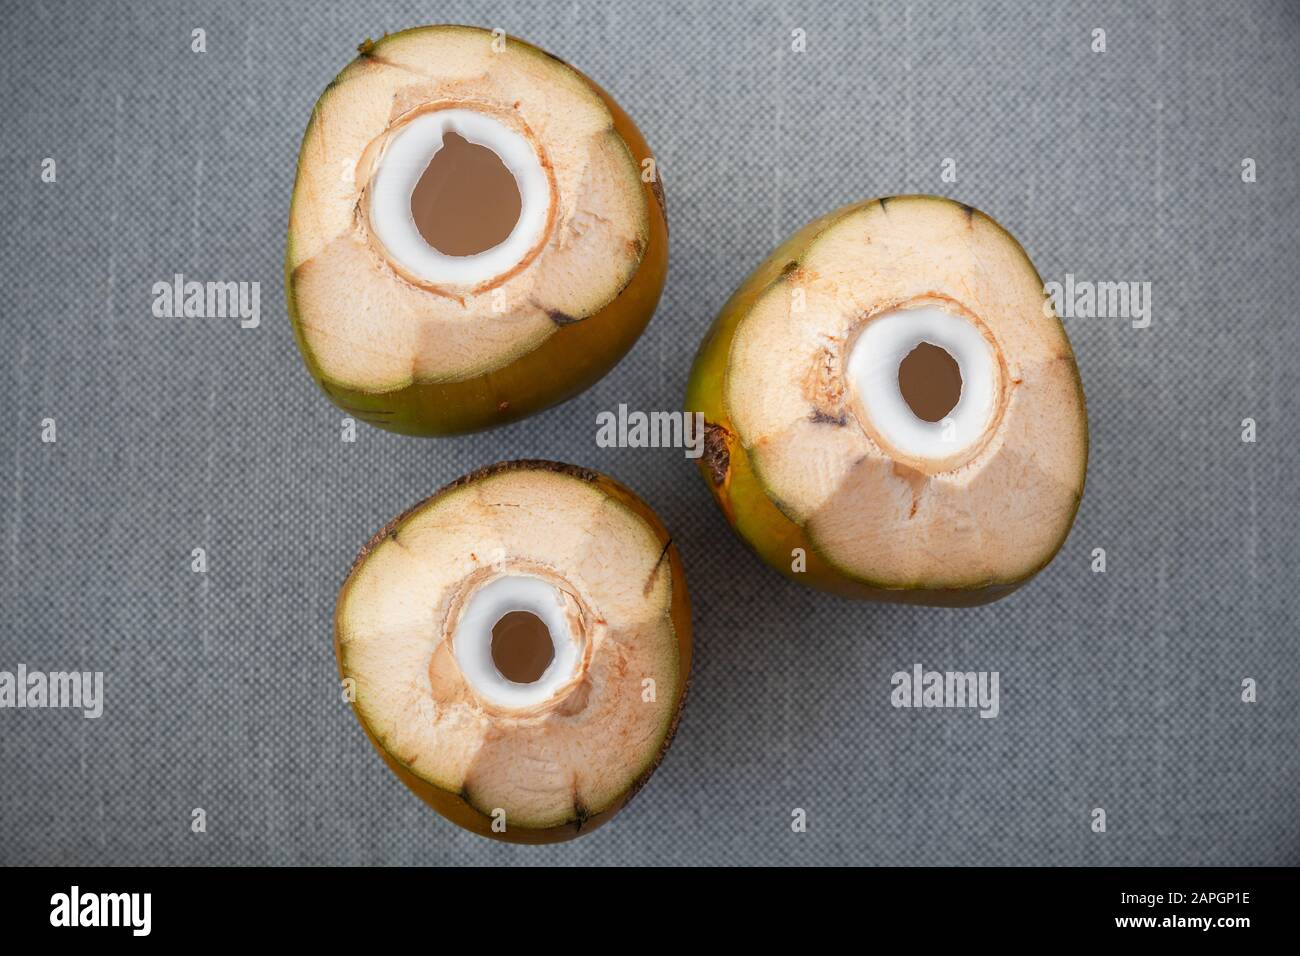 Three juicy green coconuts with holes for straw stand on a gray surface, flat lay photo, top view Stock Photo